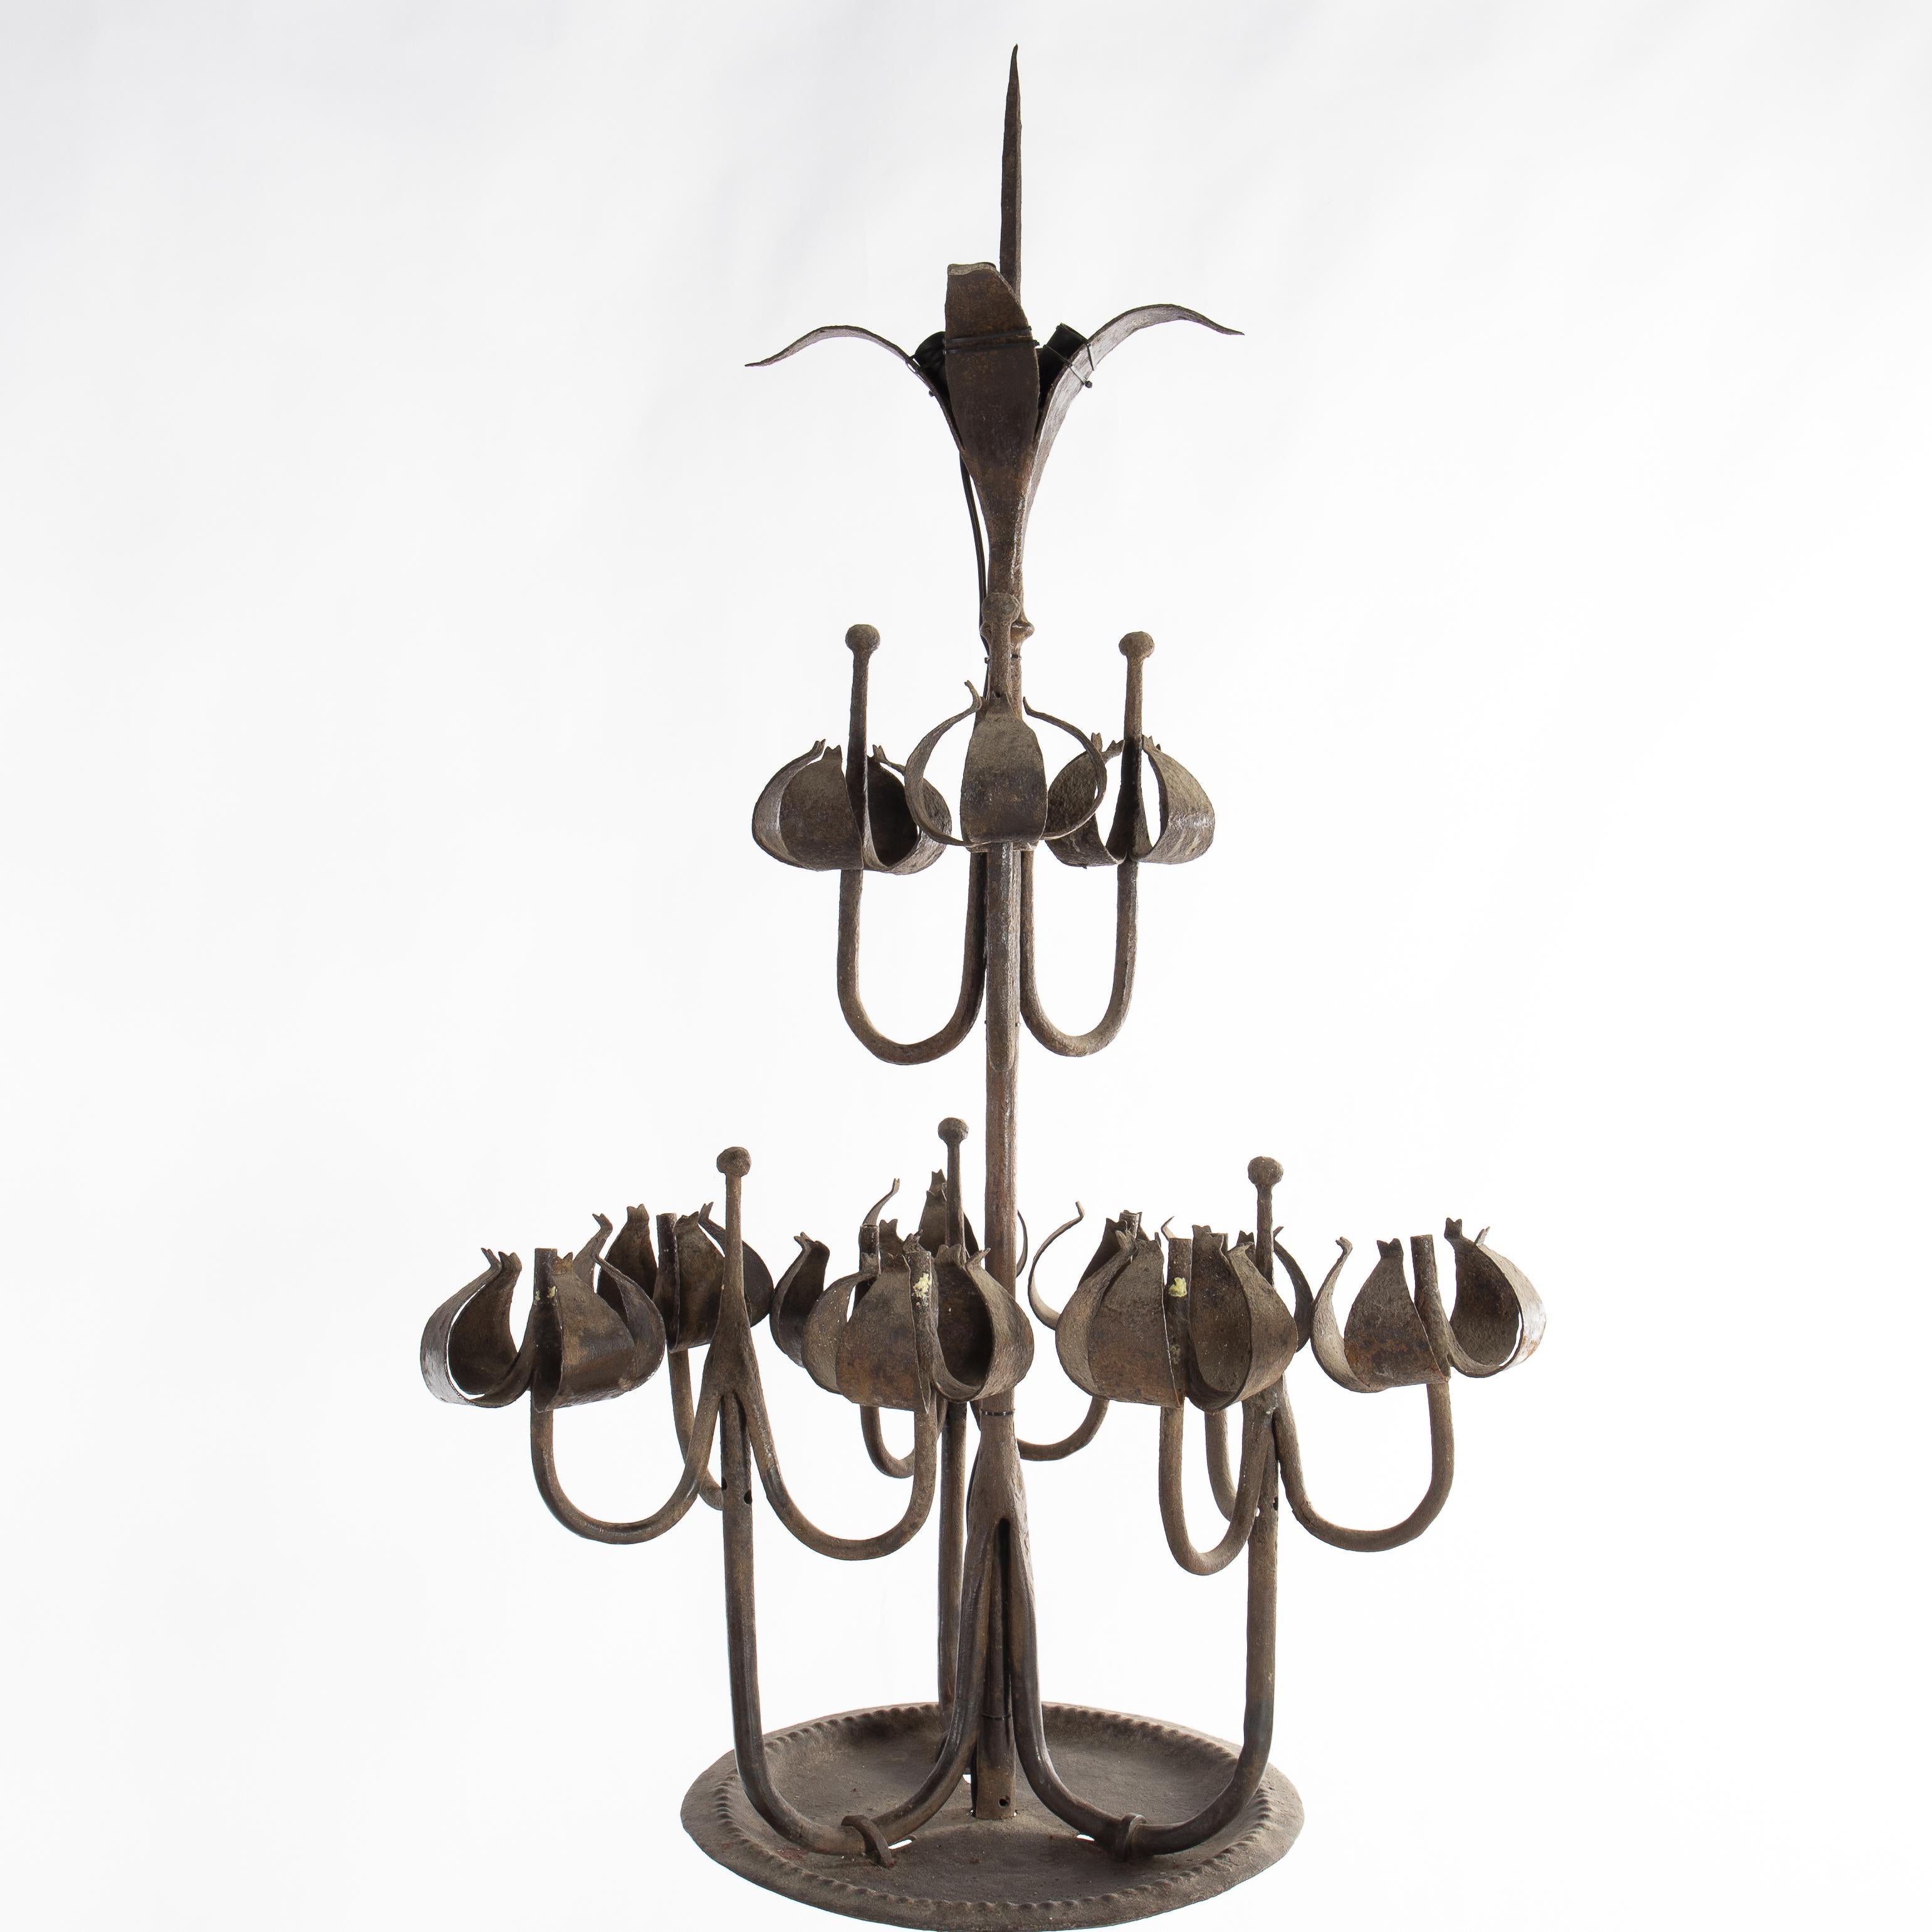 Pair of Tall Candelabra O Candelabrum, Neogothic Style, Wrought Iron, Spain In Fair Condition For Sale In Madrid, ES